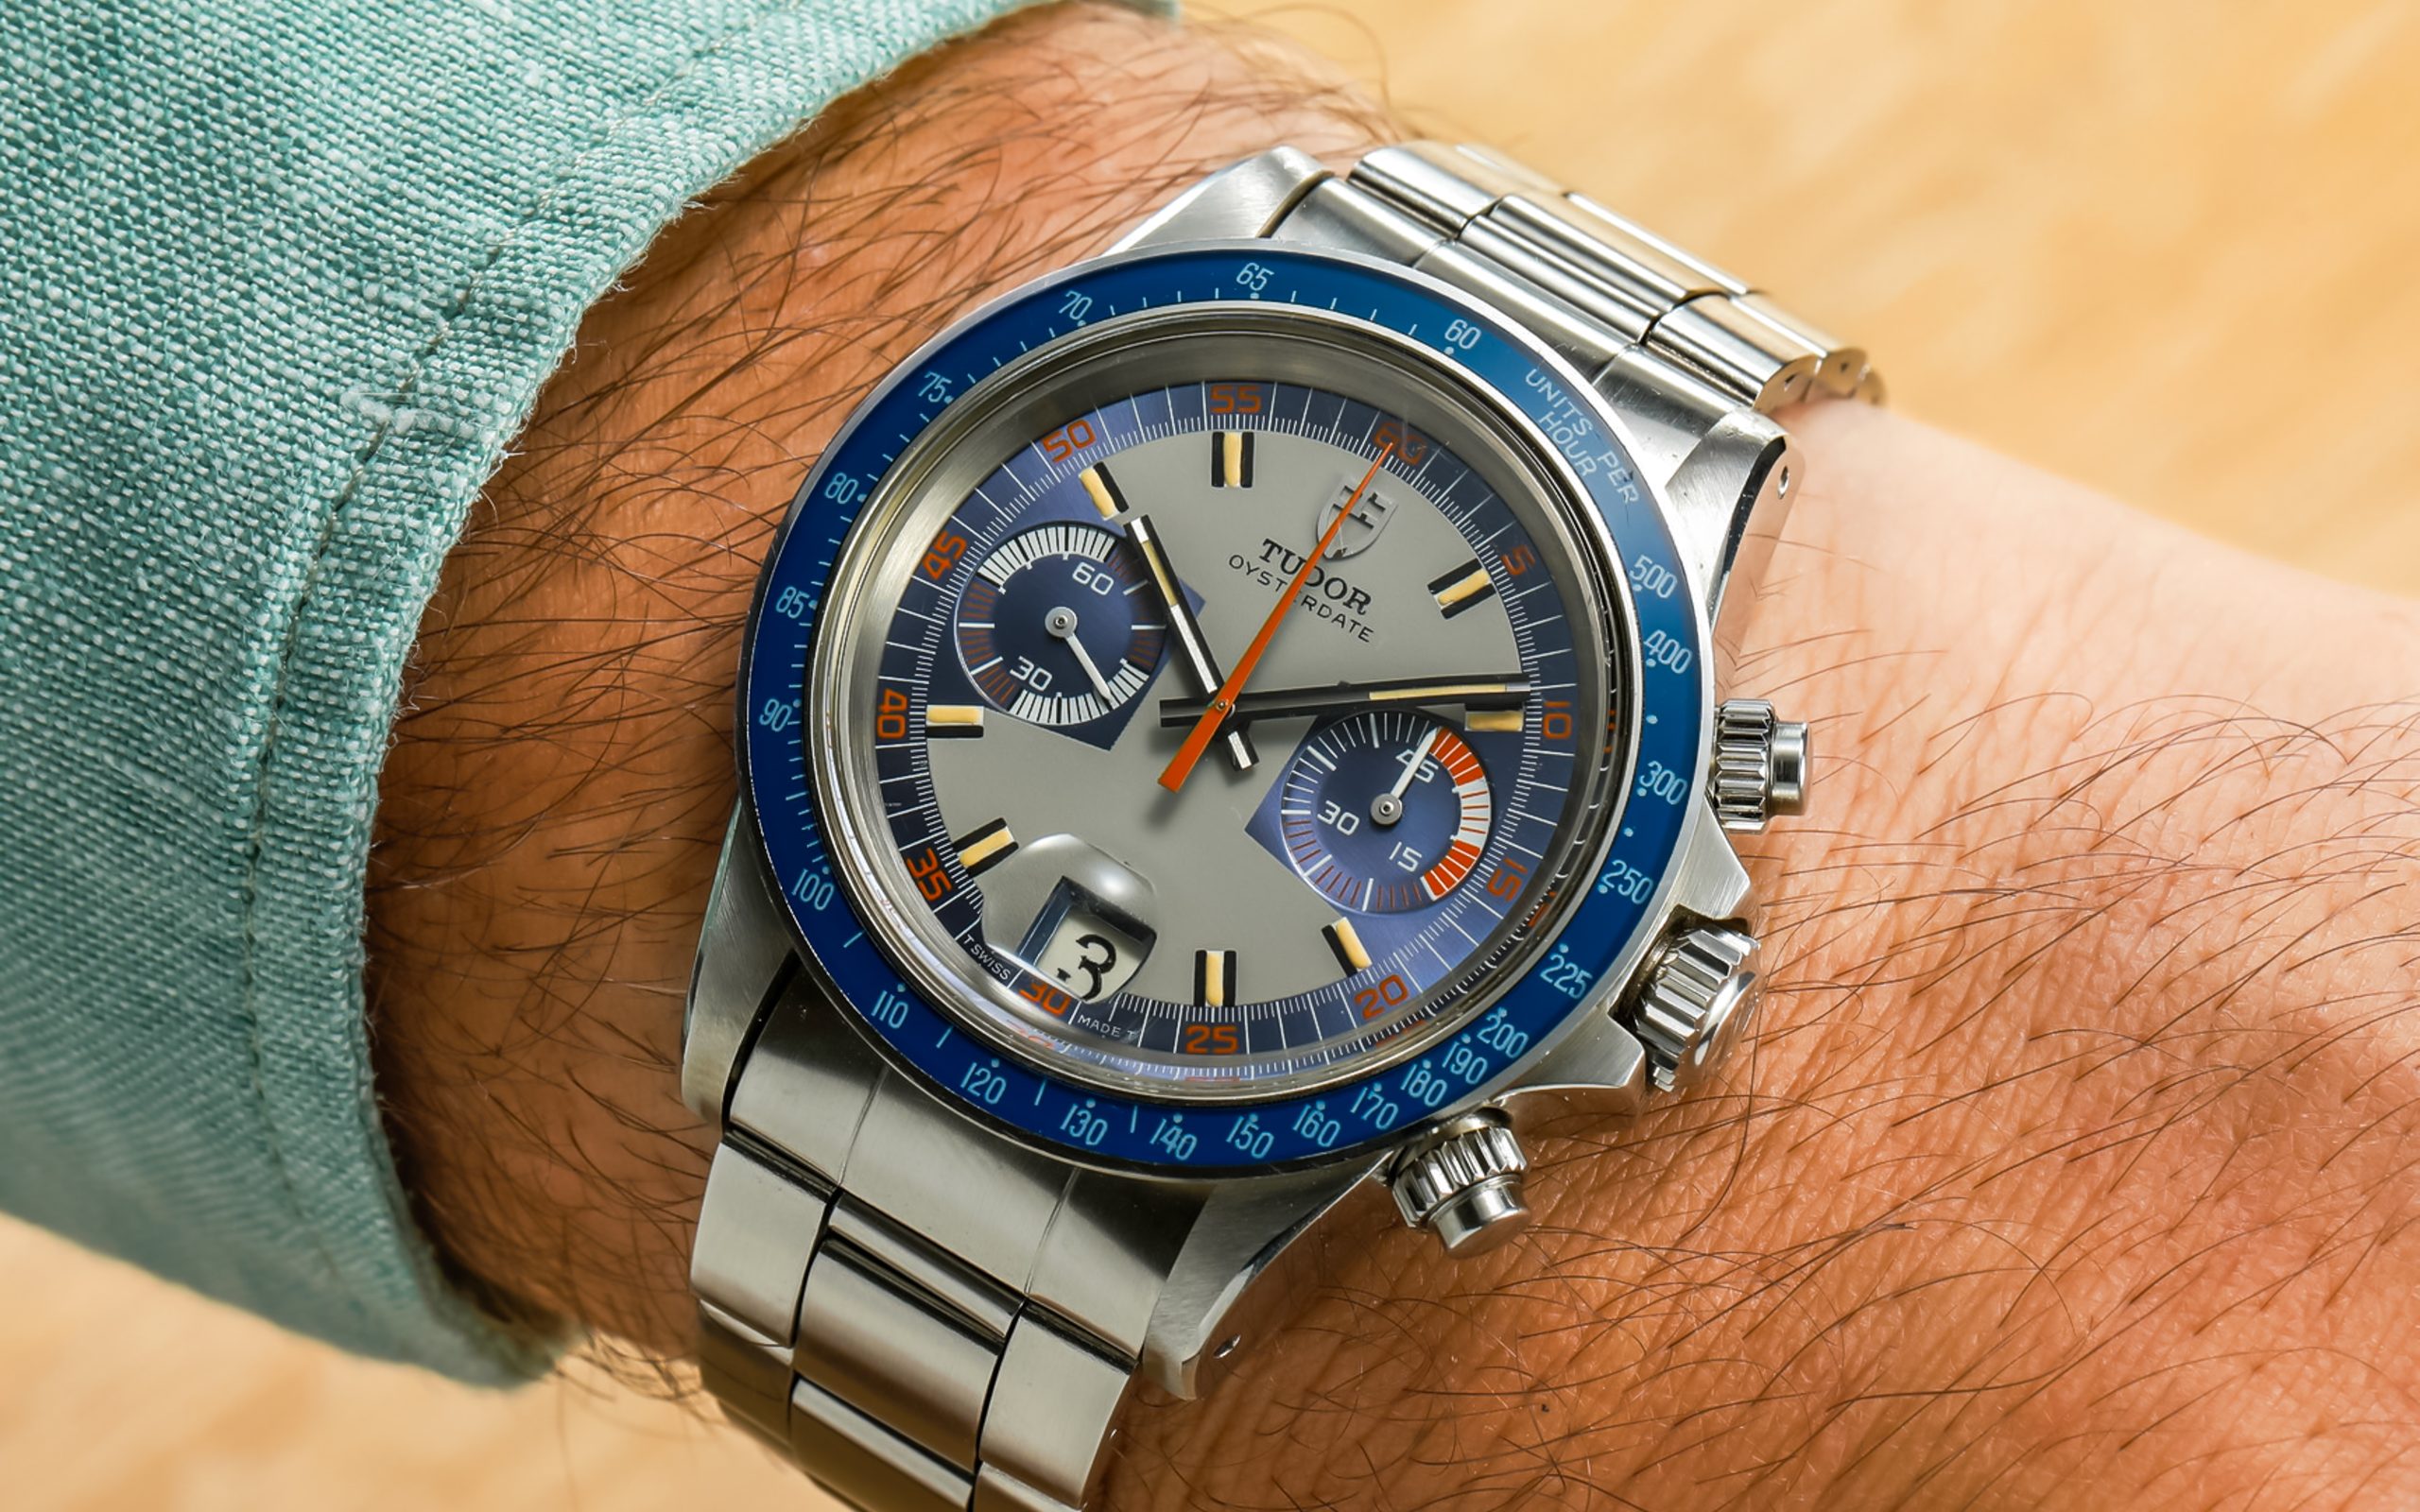 Horological Meandering - Hands-on with another lesser known world